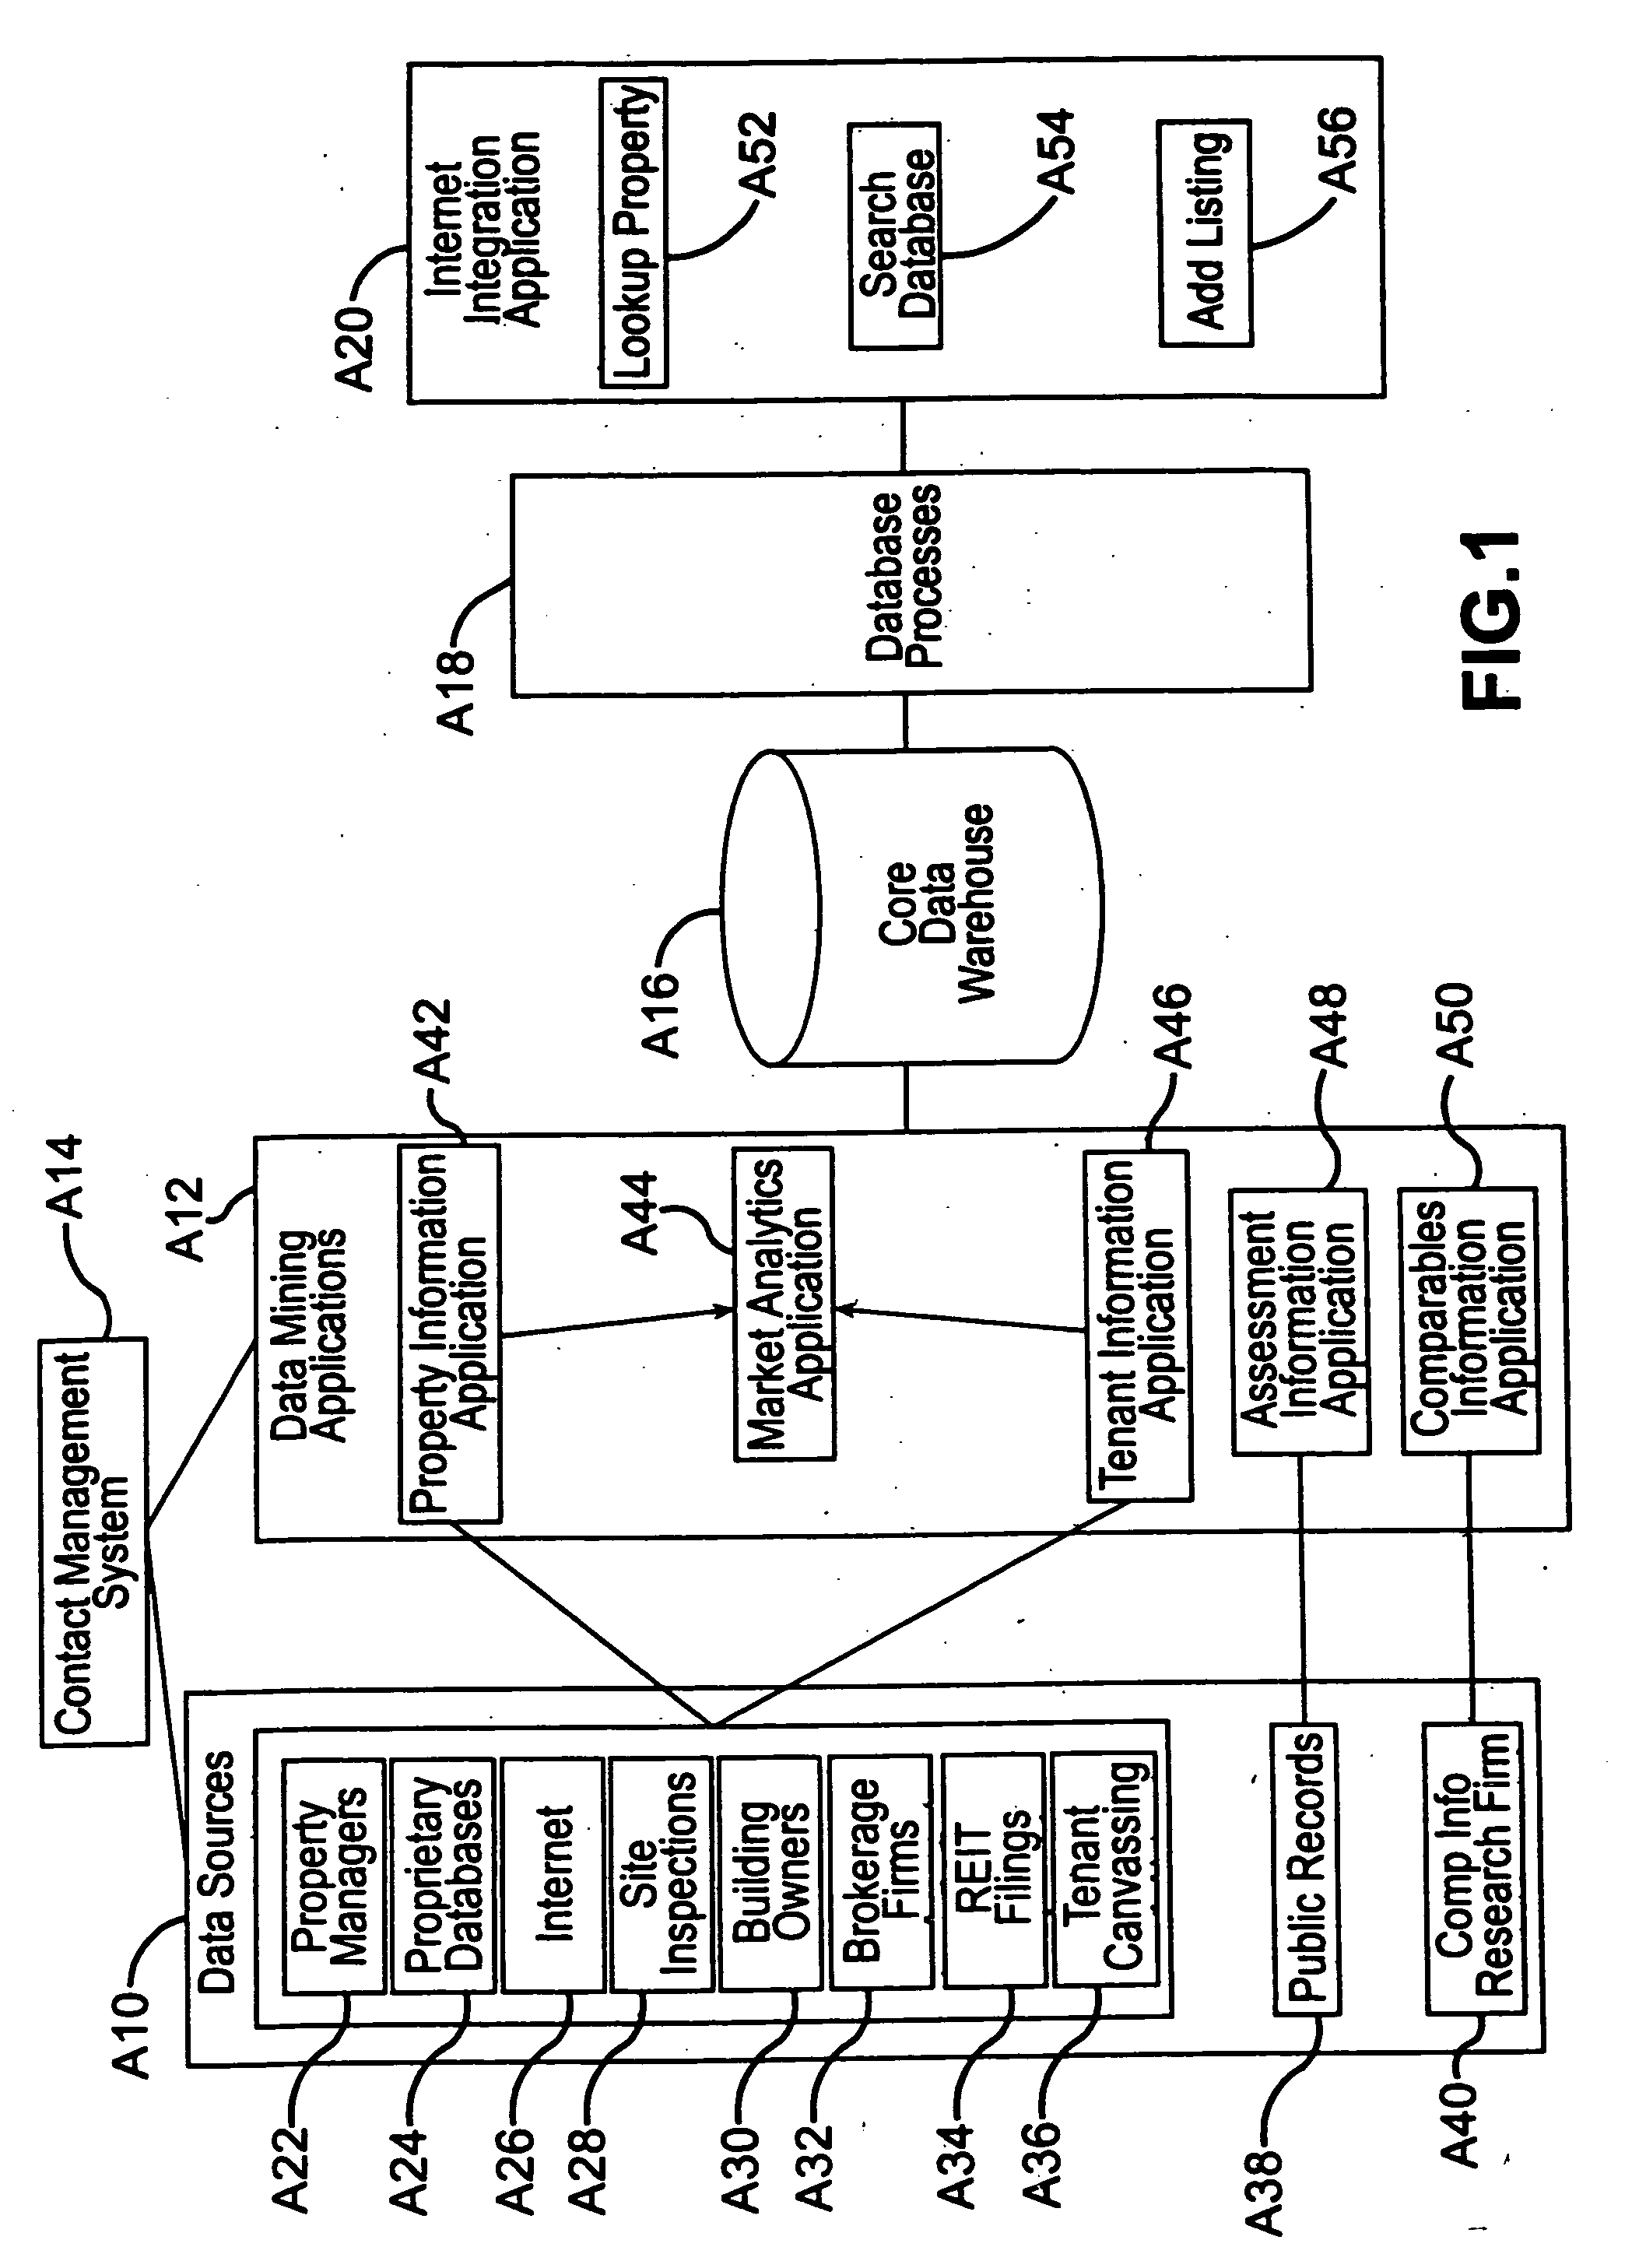 System and method for associating aerial images, map features, and information